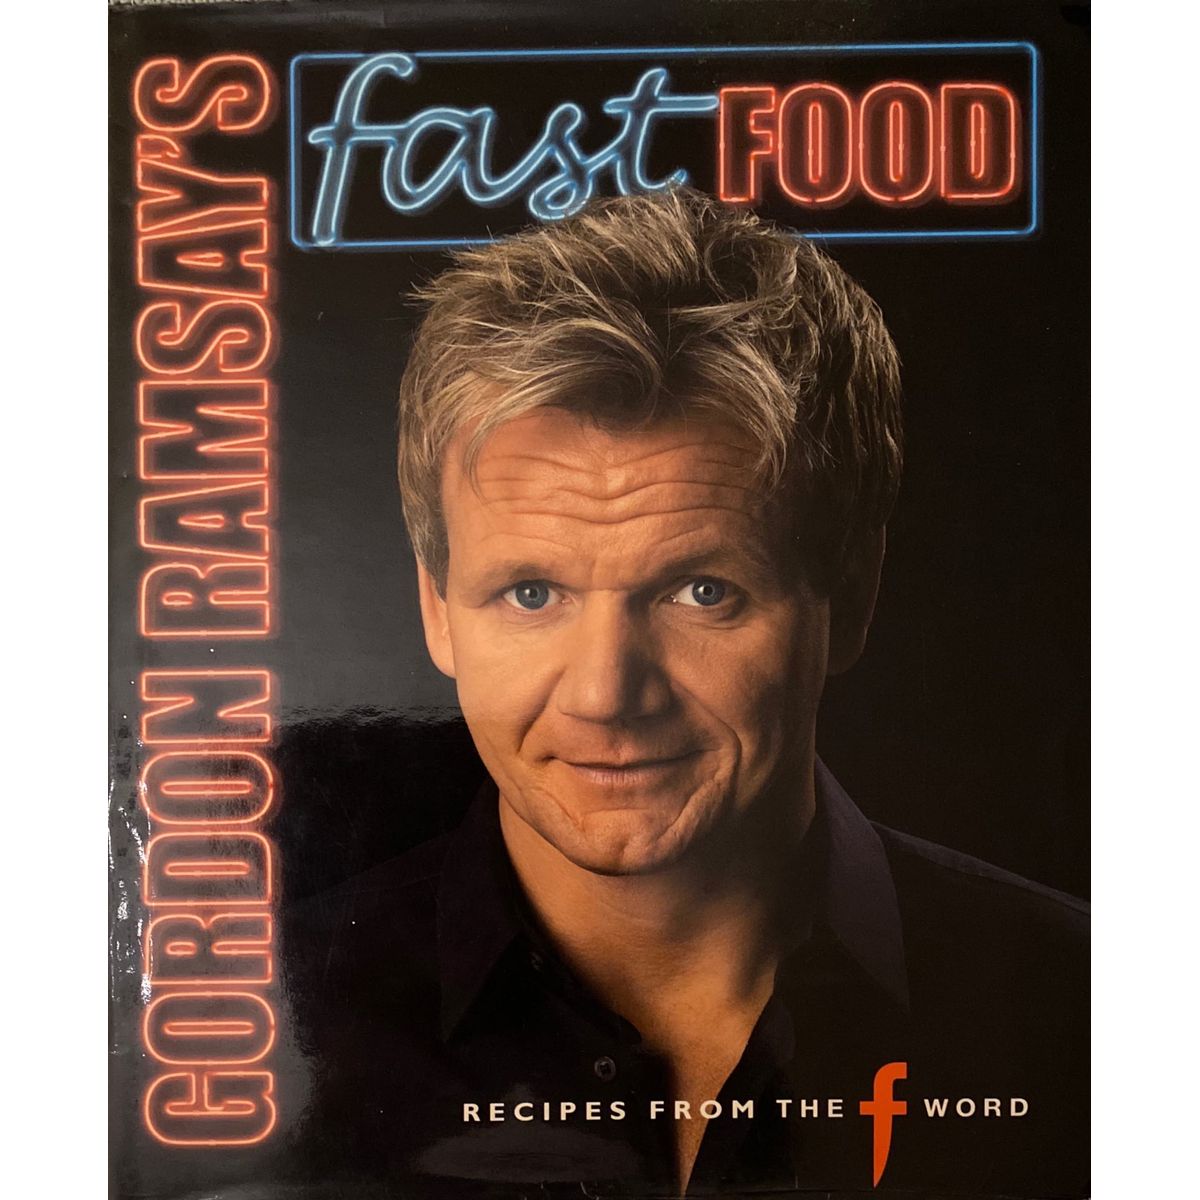 ISBN: 9781844004539 / 1844004538 - Gordon Ramsay's Fast Food: Recipes from the F Word by Gordon Ramsay with Mark Sargeant and Emily Quah [2007]